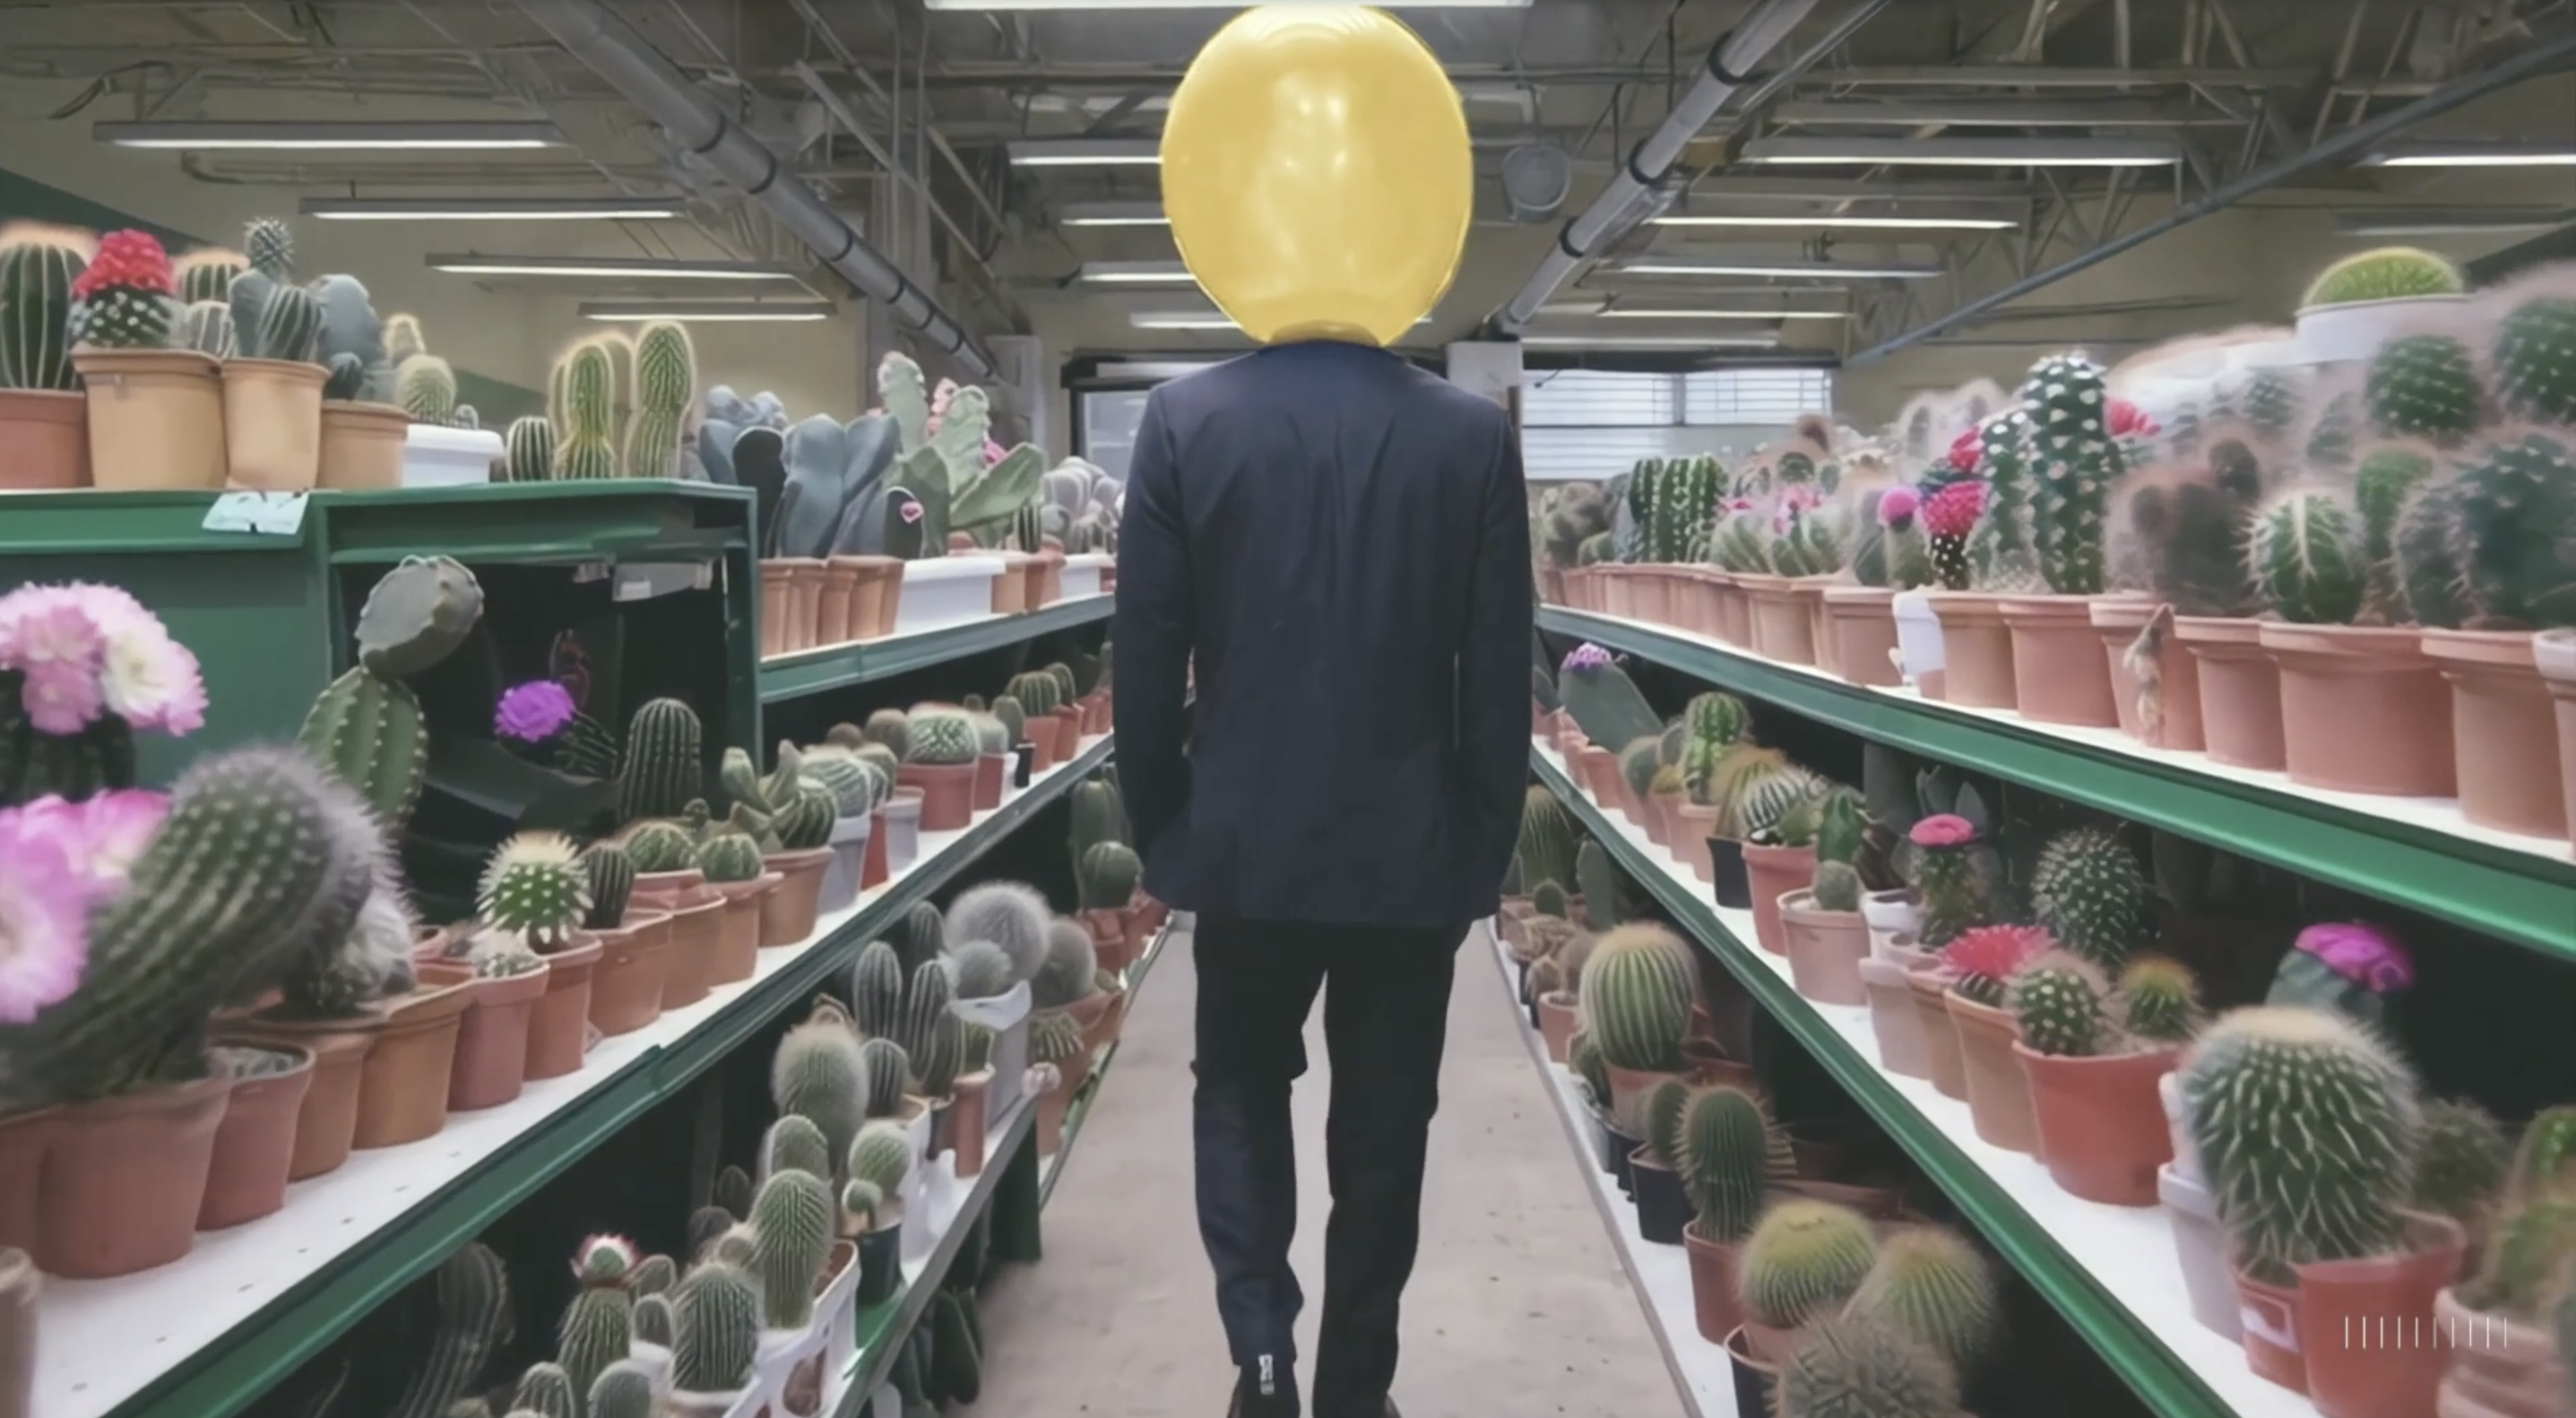 a person with a balloon head walks away from us down a shop aisle of potted cactus plants